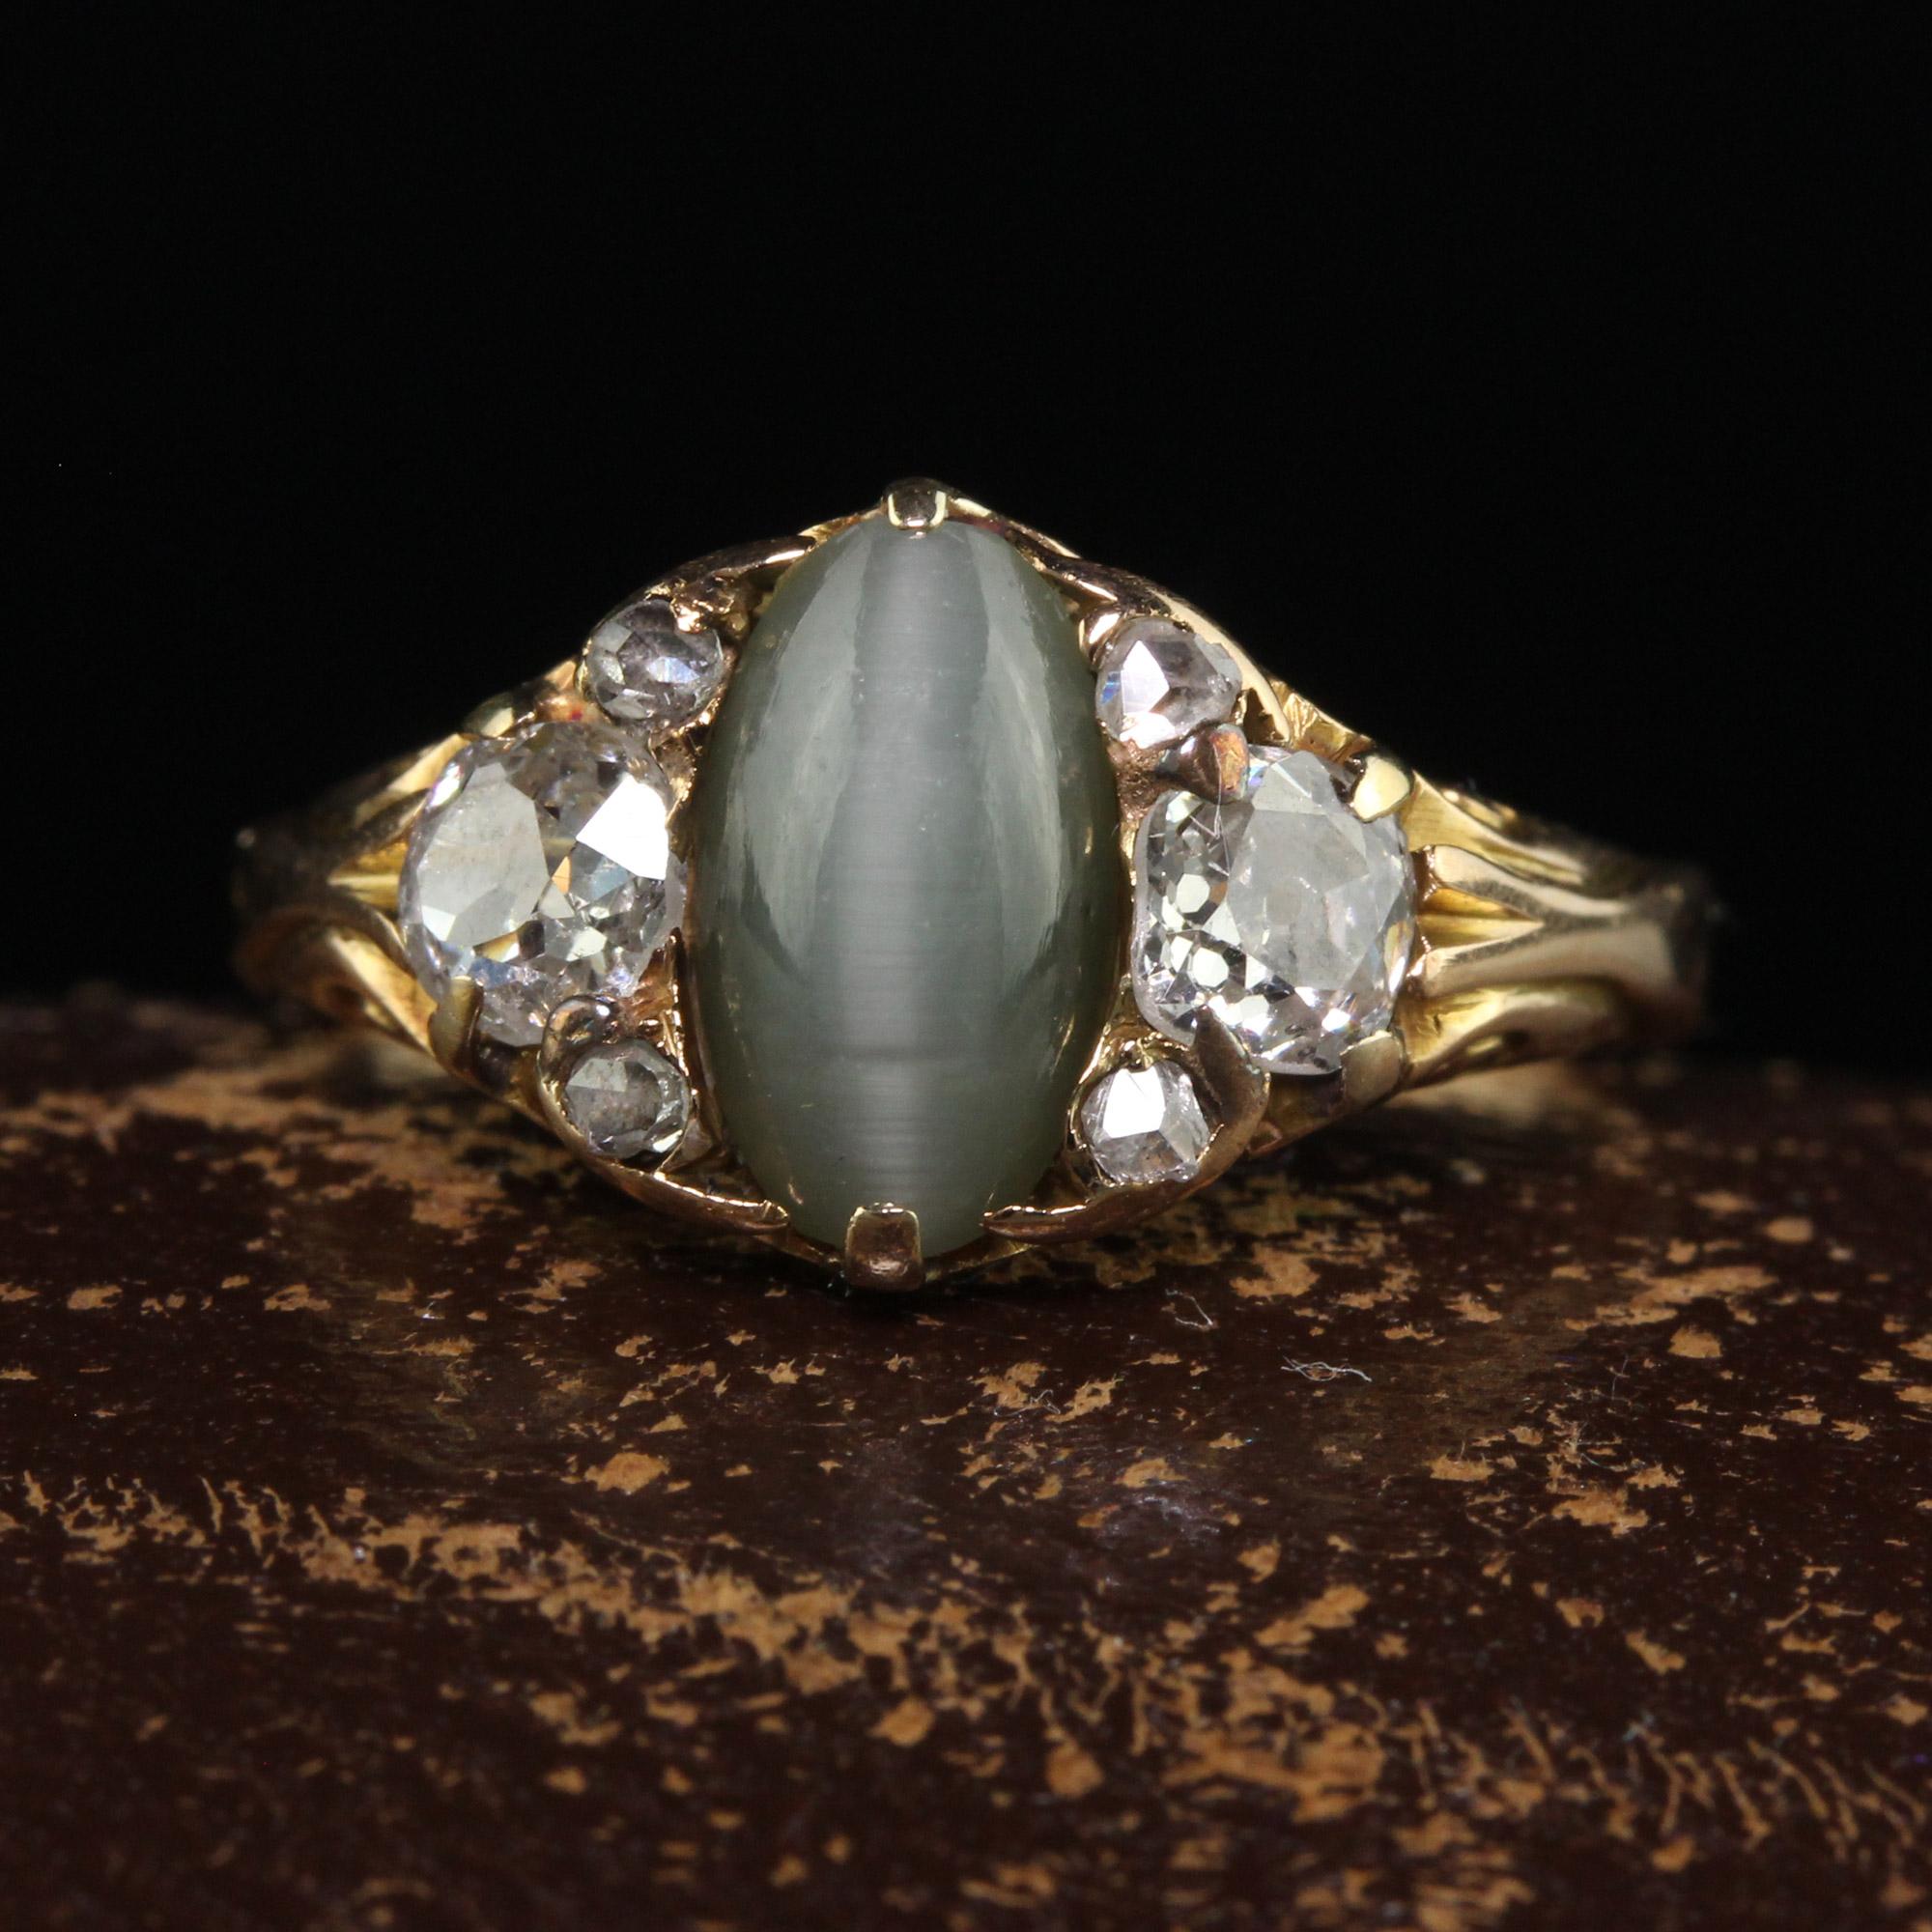 Beautiful Antique Victorian 18K Yellow Gold Old Mine Diamond and Cats Eye Chrysoberyl Ring. This beautiful Victorian diamond ring is crafted in 18k yellow gold. The center holds a beautiful cabochon cats eye chrysoberyl and has old mine cut diamonds